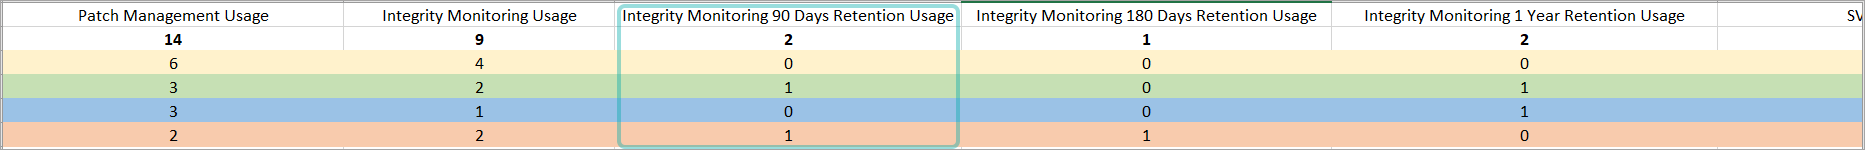 monthly__integritymonitoring_90days_usage_340181_en.png